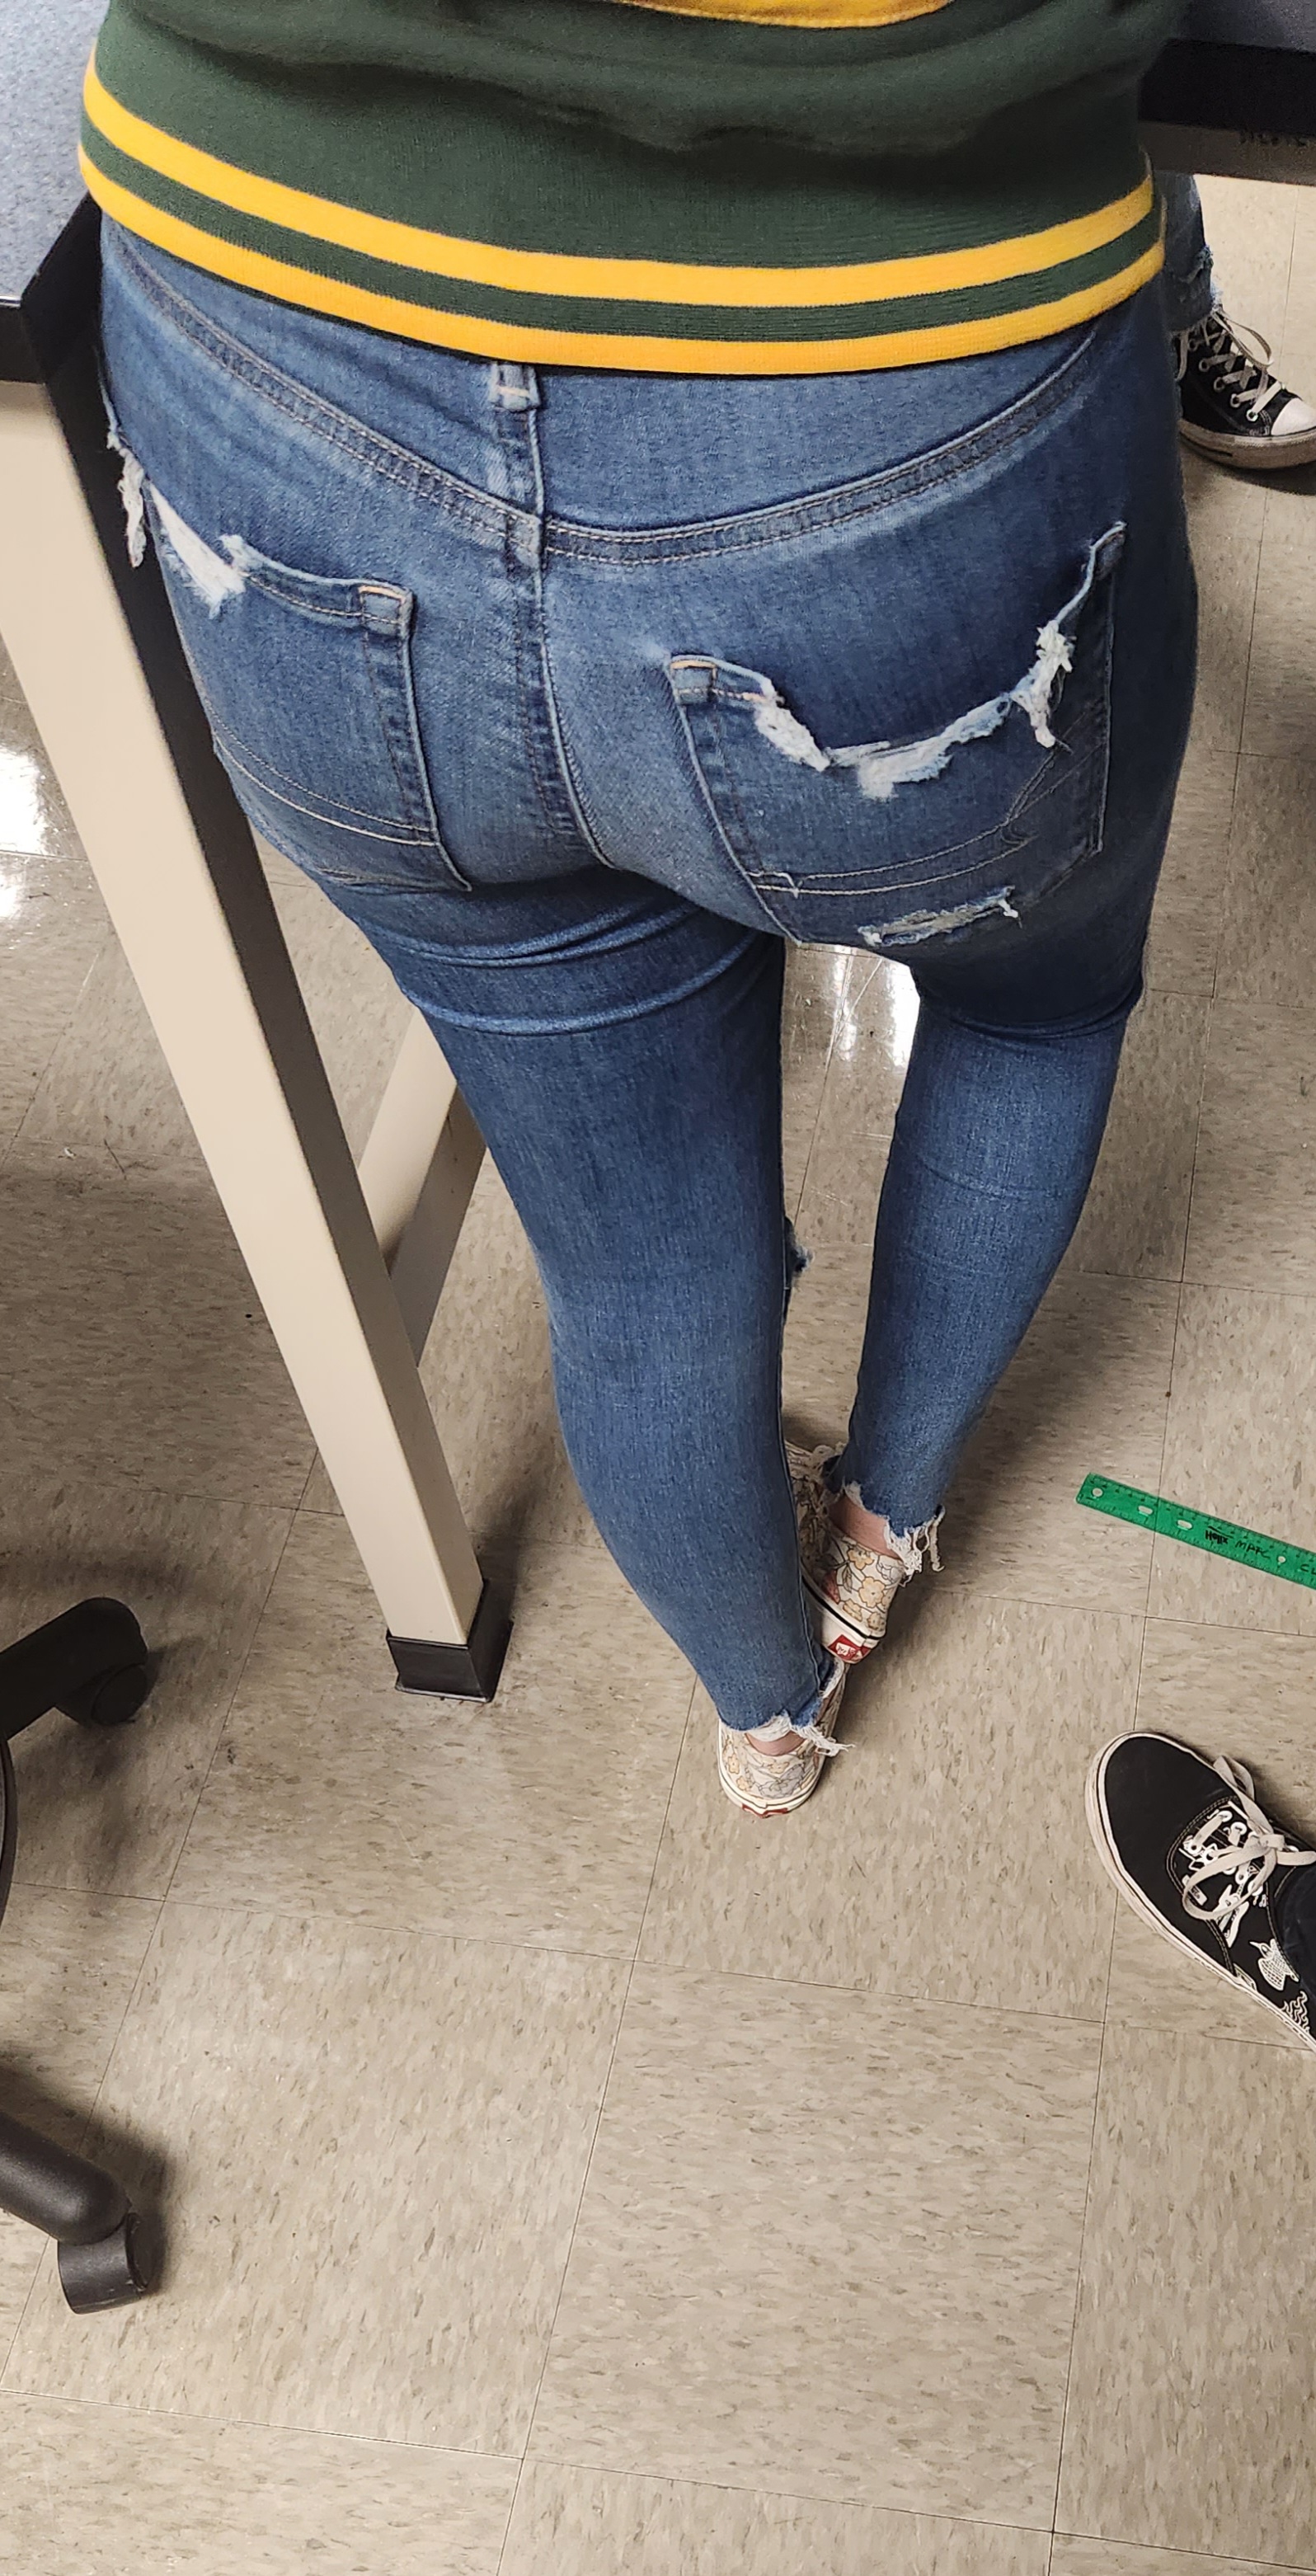 Former classmate in really tight jeans - Tight Jeans - Forum